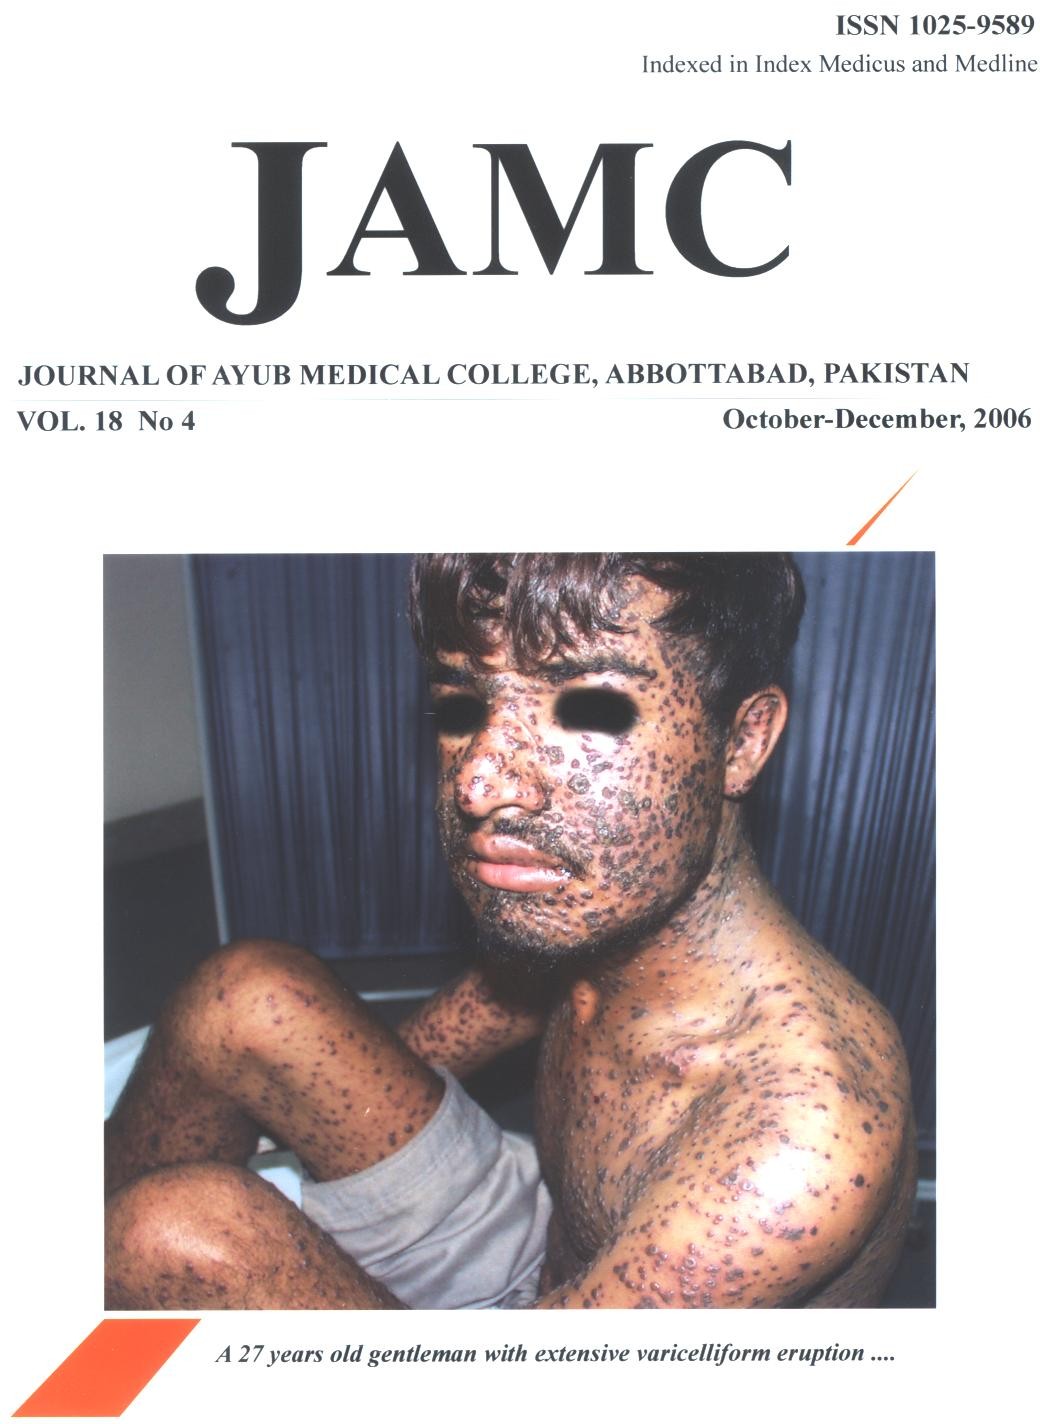 					View Vol. 18 No. 4 (2006): JOURNAL OF AYUB MEDICAL COLLEGE, ABBOTTABAD
				